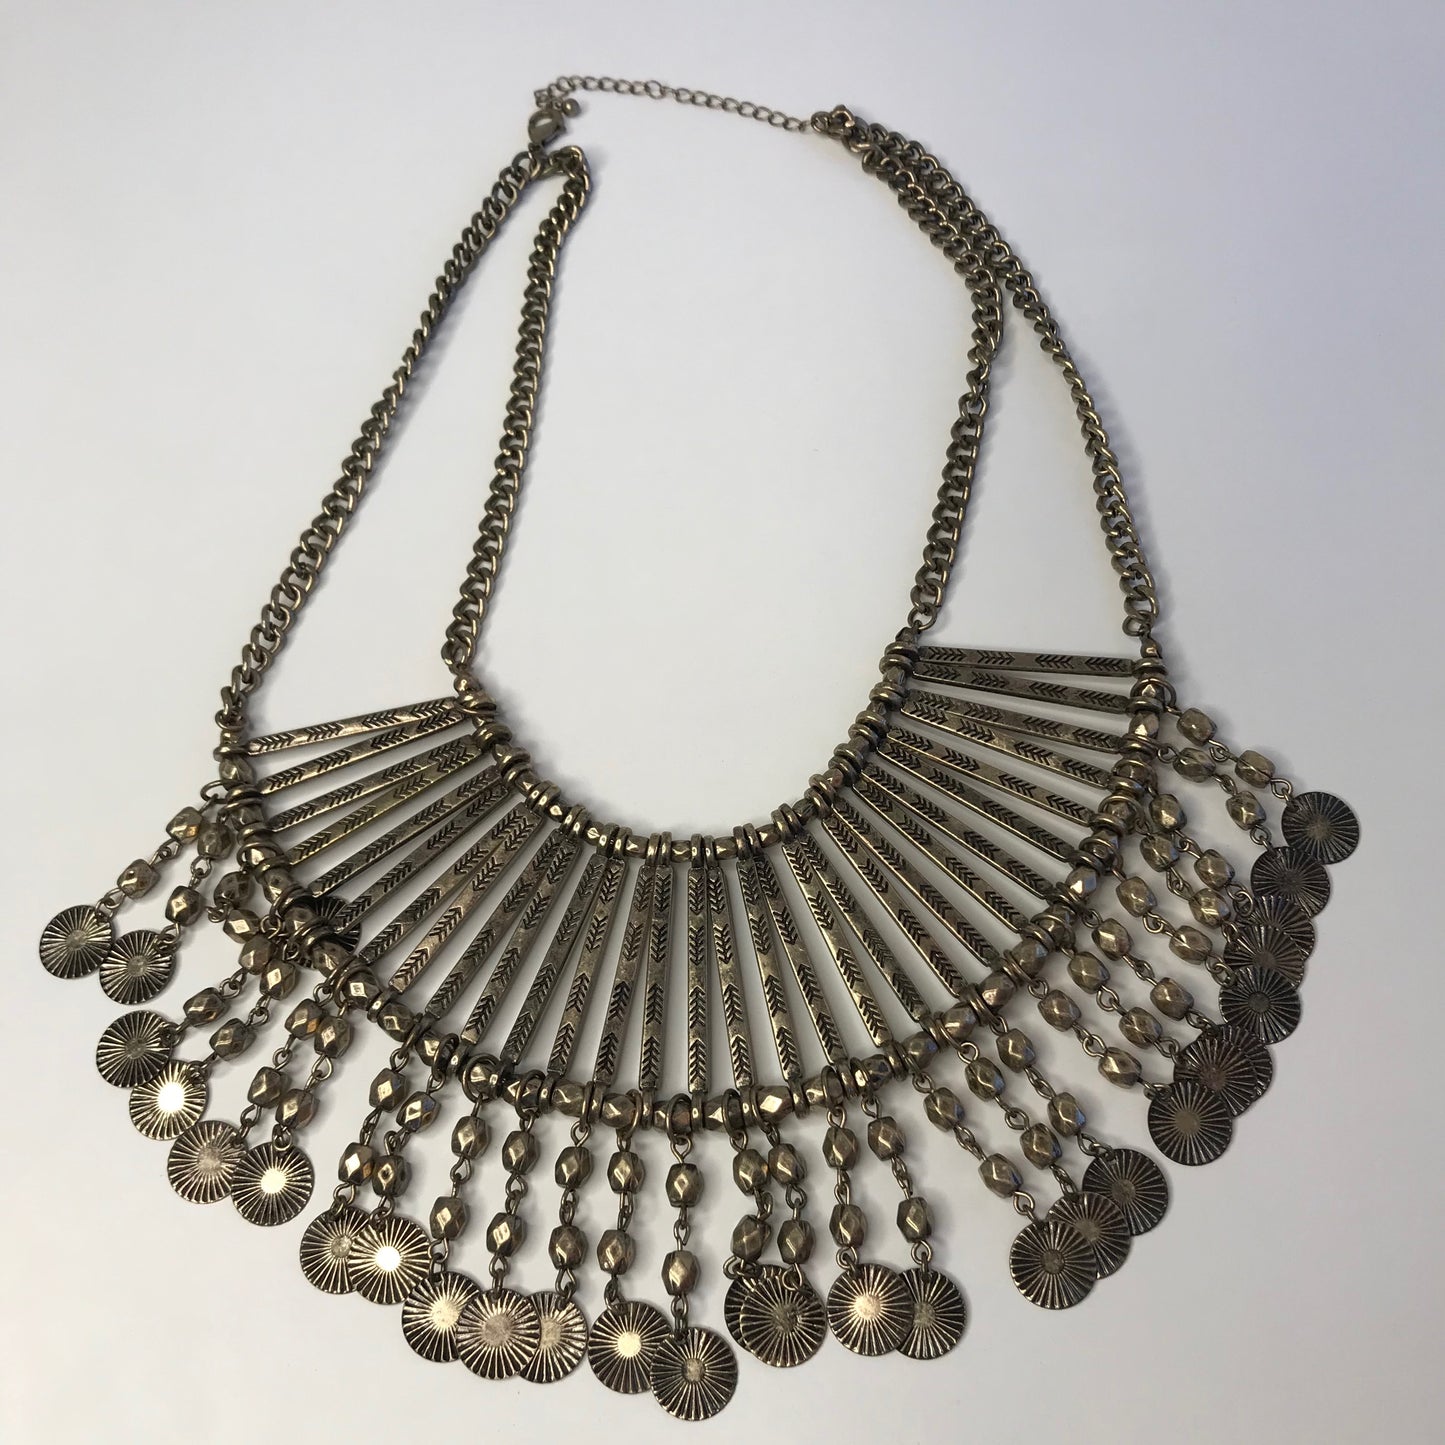 Adjustable Chunky Bohemian Hippie Coin Statement Necklace